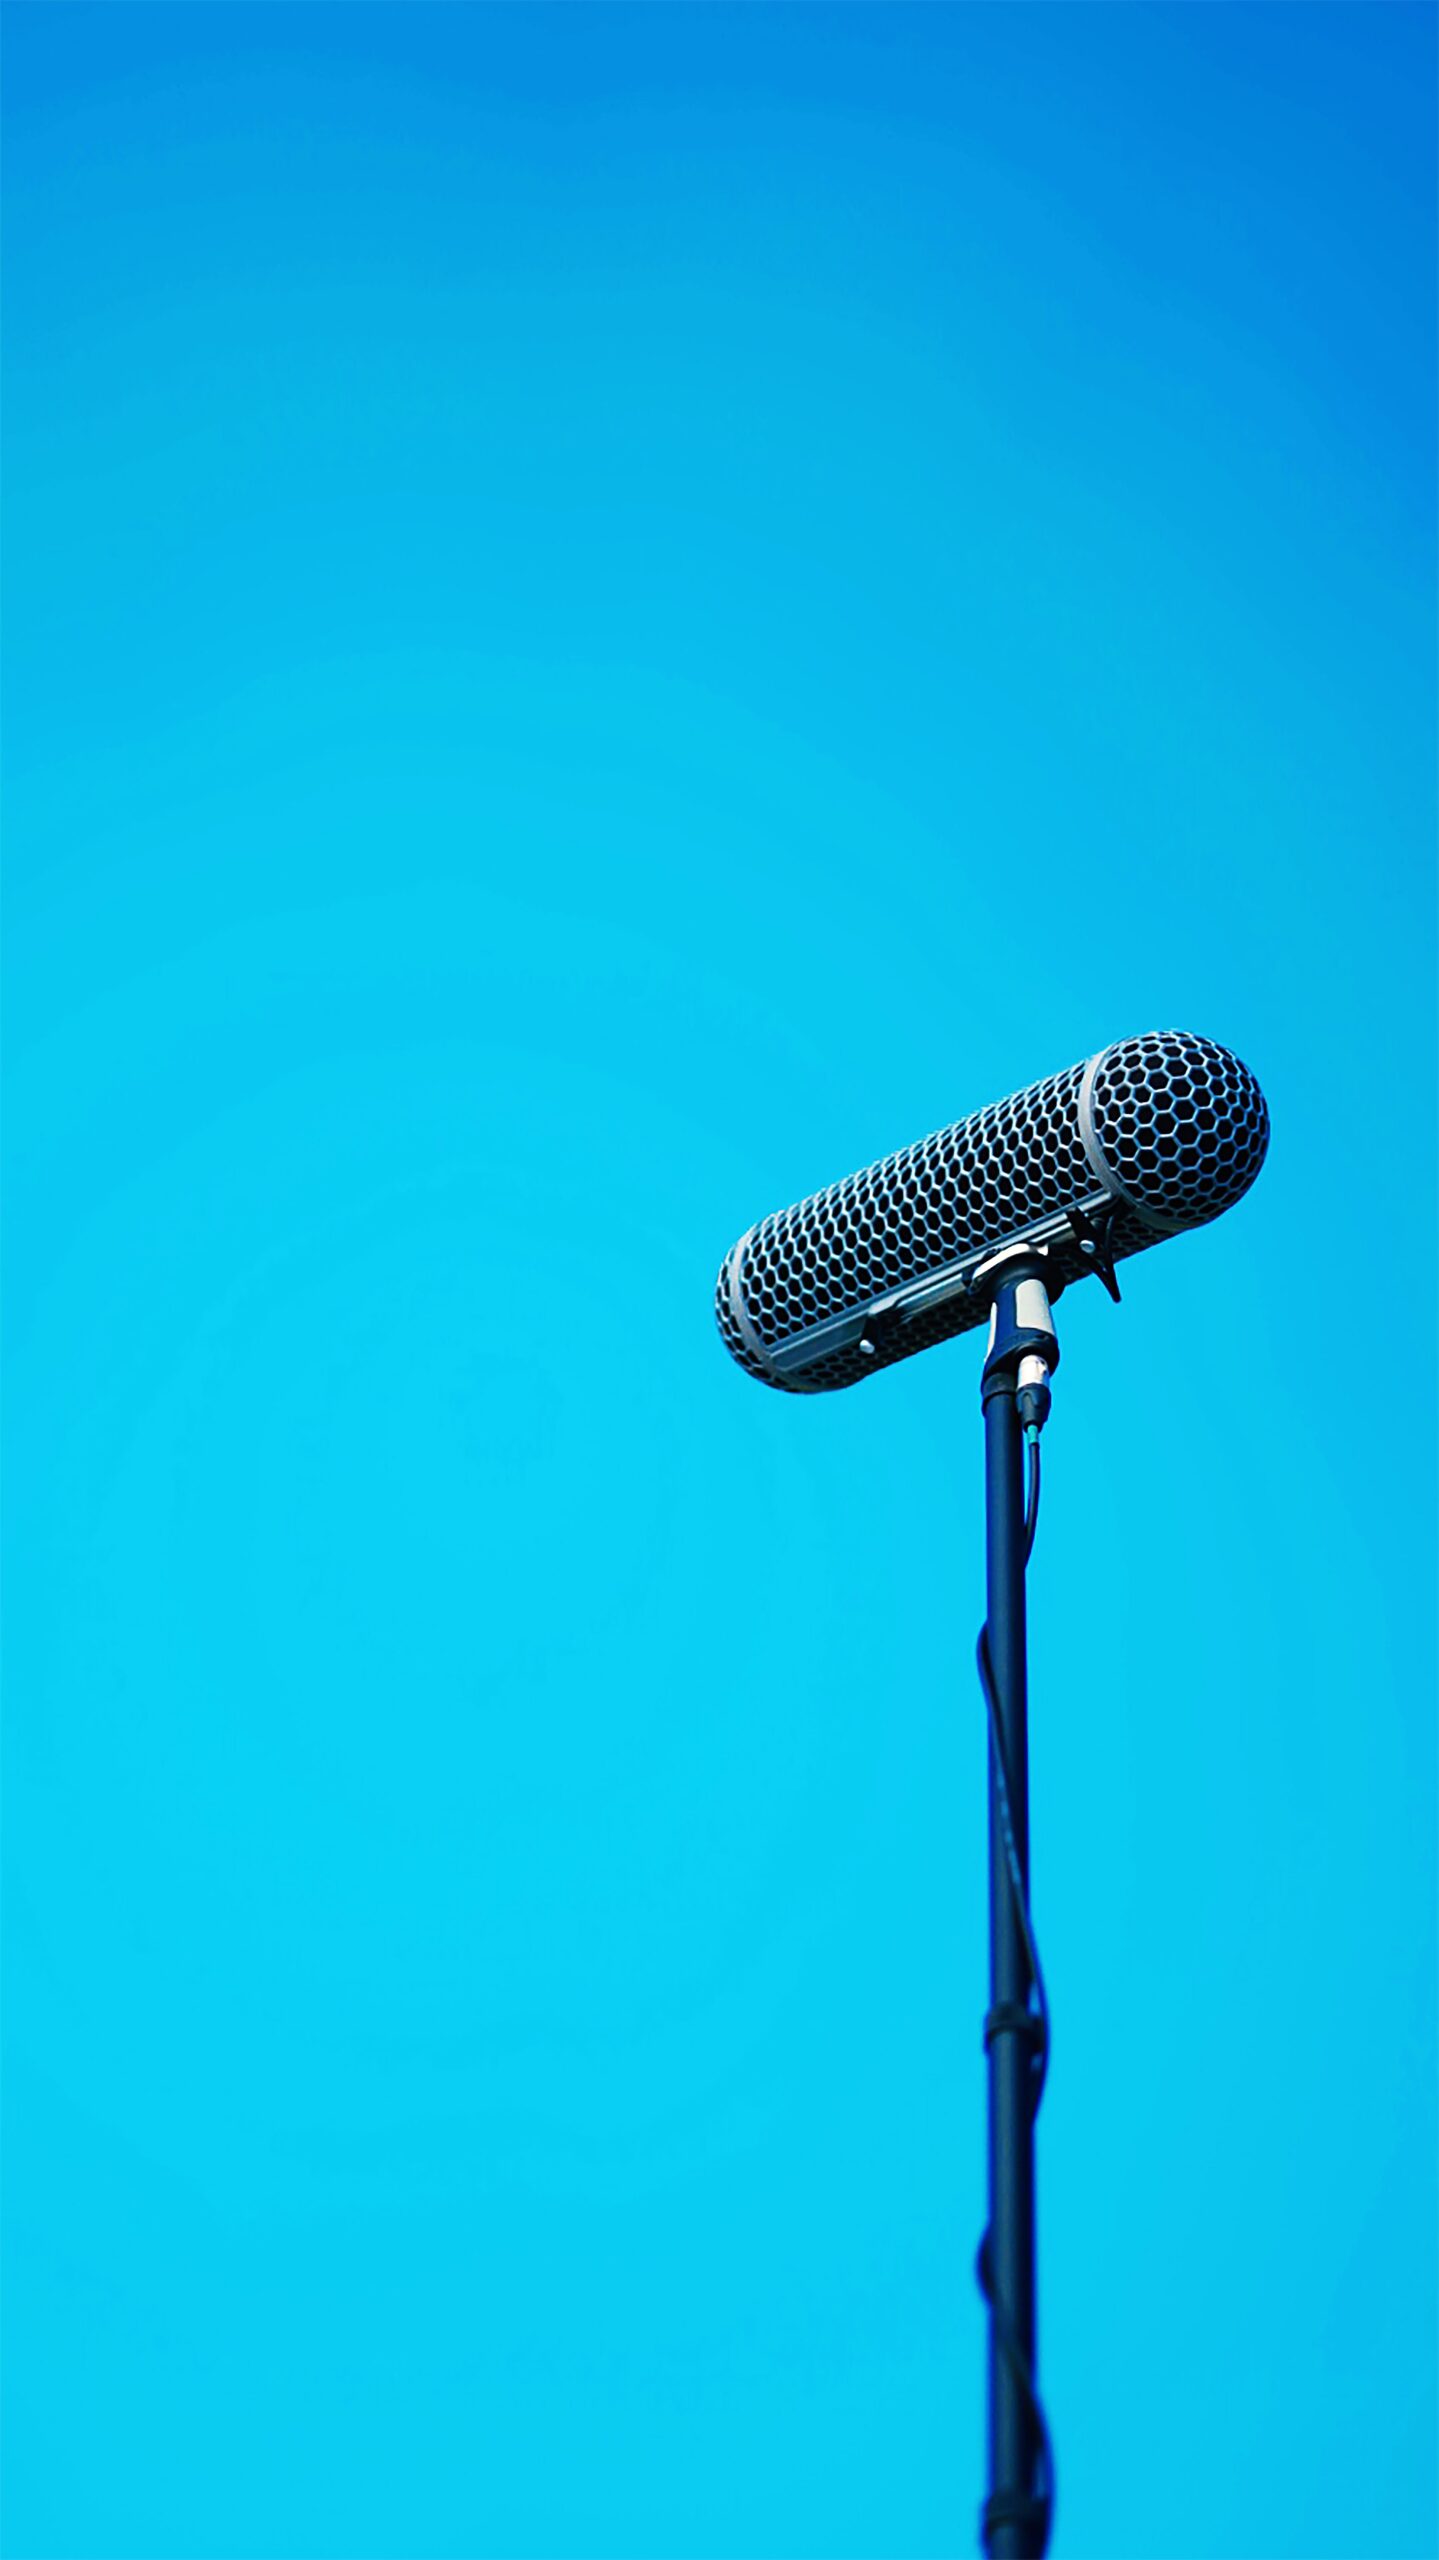 A black microphone against a blue background.